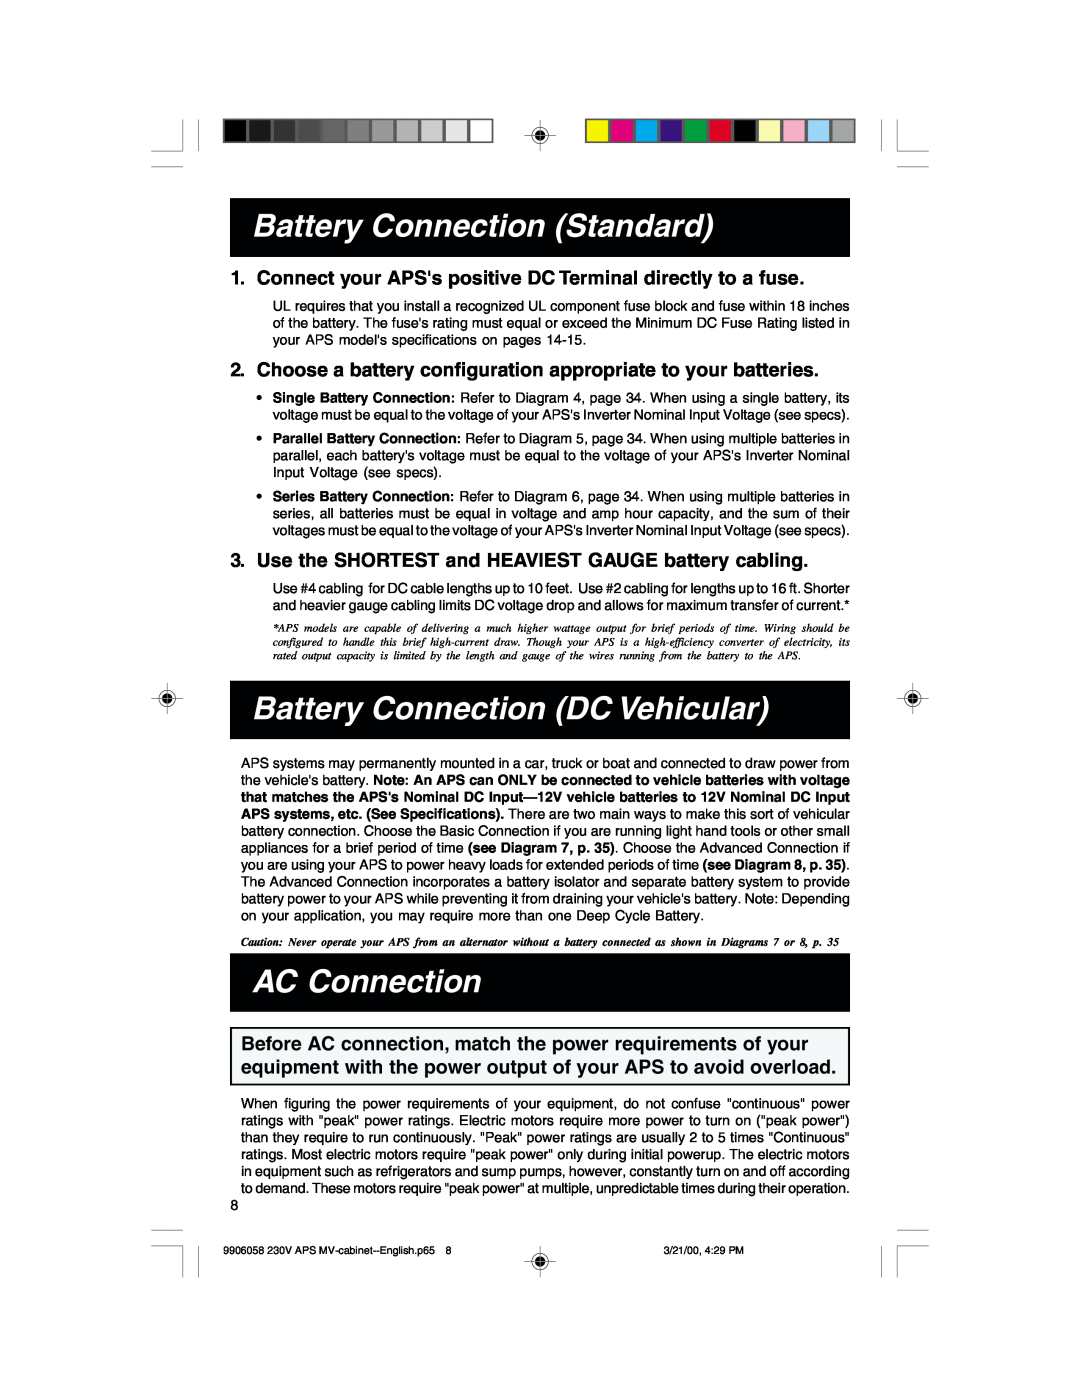 Tripp Lite APS2012INT, APS1024INT, APS2424INT Battery Connection Standard, Battery Connection DC Vehicular, AC Connection 